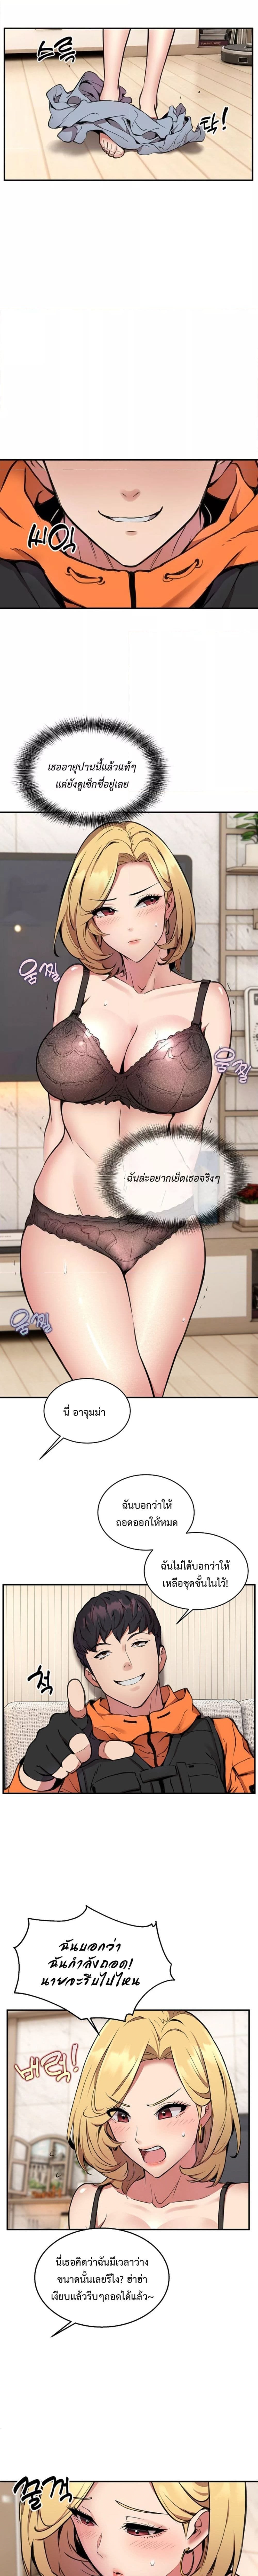 Driver in the New City ตอนที่ 3 ภาพ 2